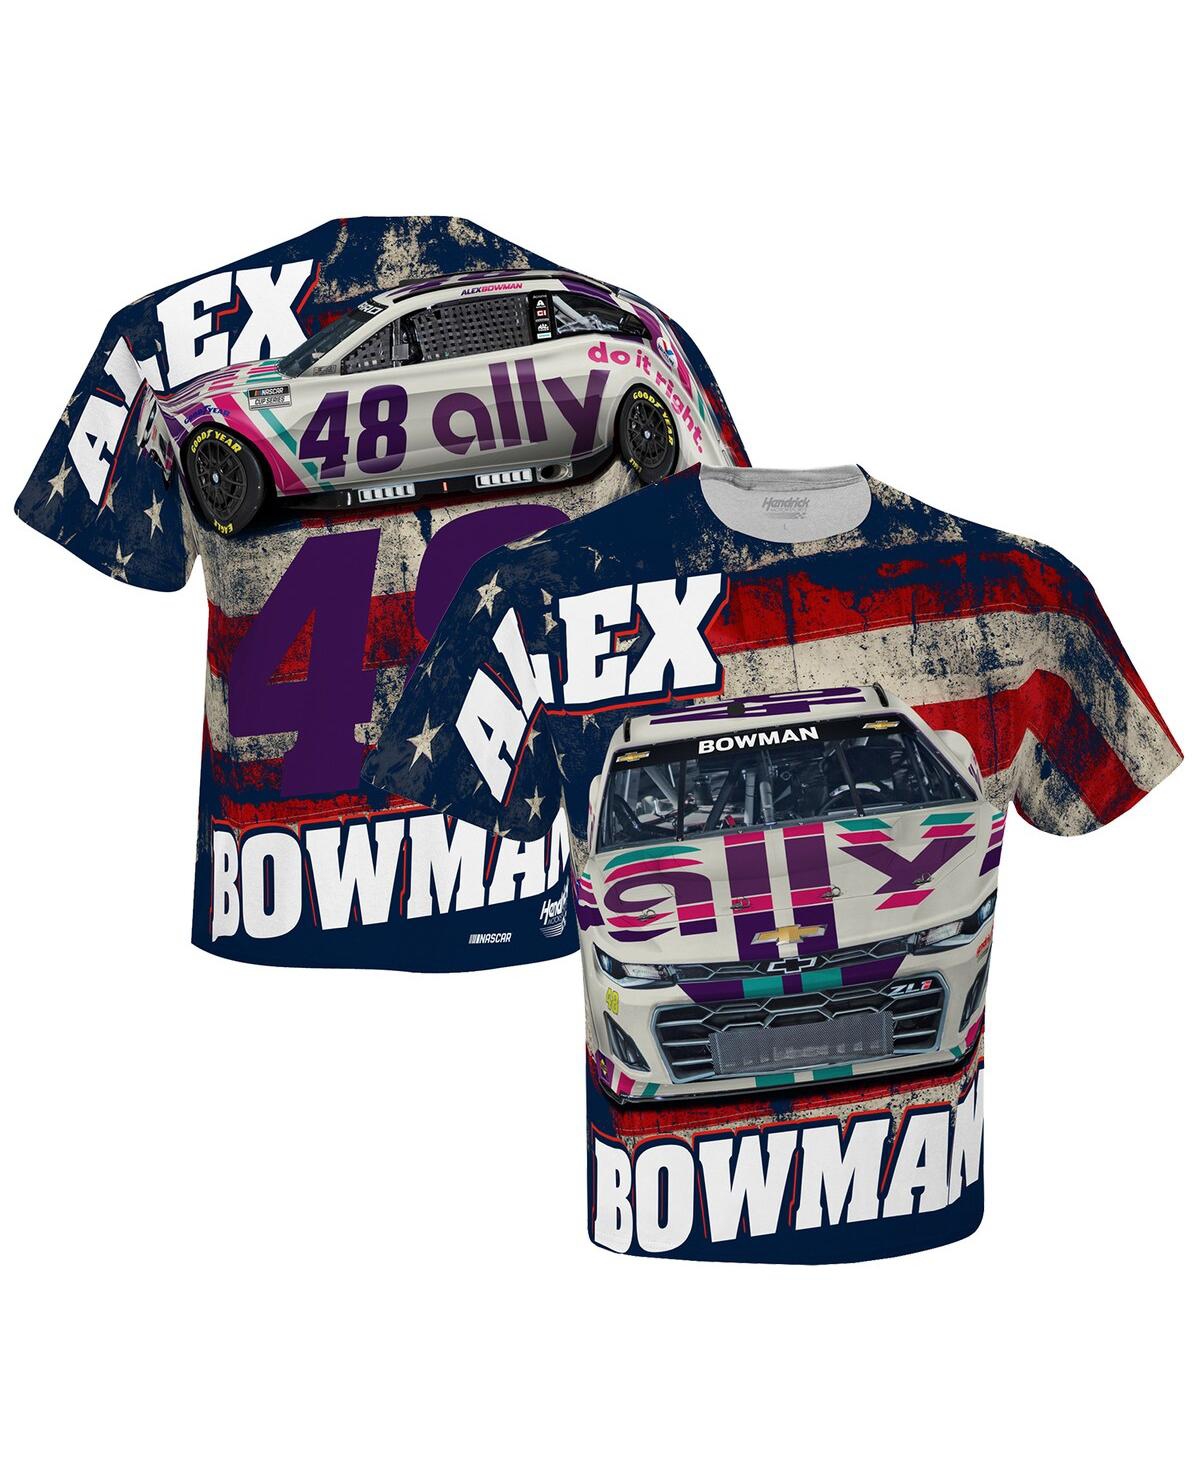 HENDRICK MOTORSPORTS TEAM COLLECTION MEN'S HENDRICK MOTORSPORTS TEAM COLLECTION WHITE ALEX BOWMAN ALLY SUBLIMATED PATRIOTIC TOTAL PRINT T